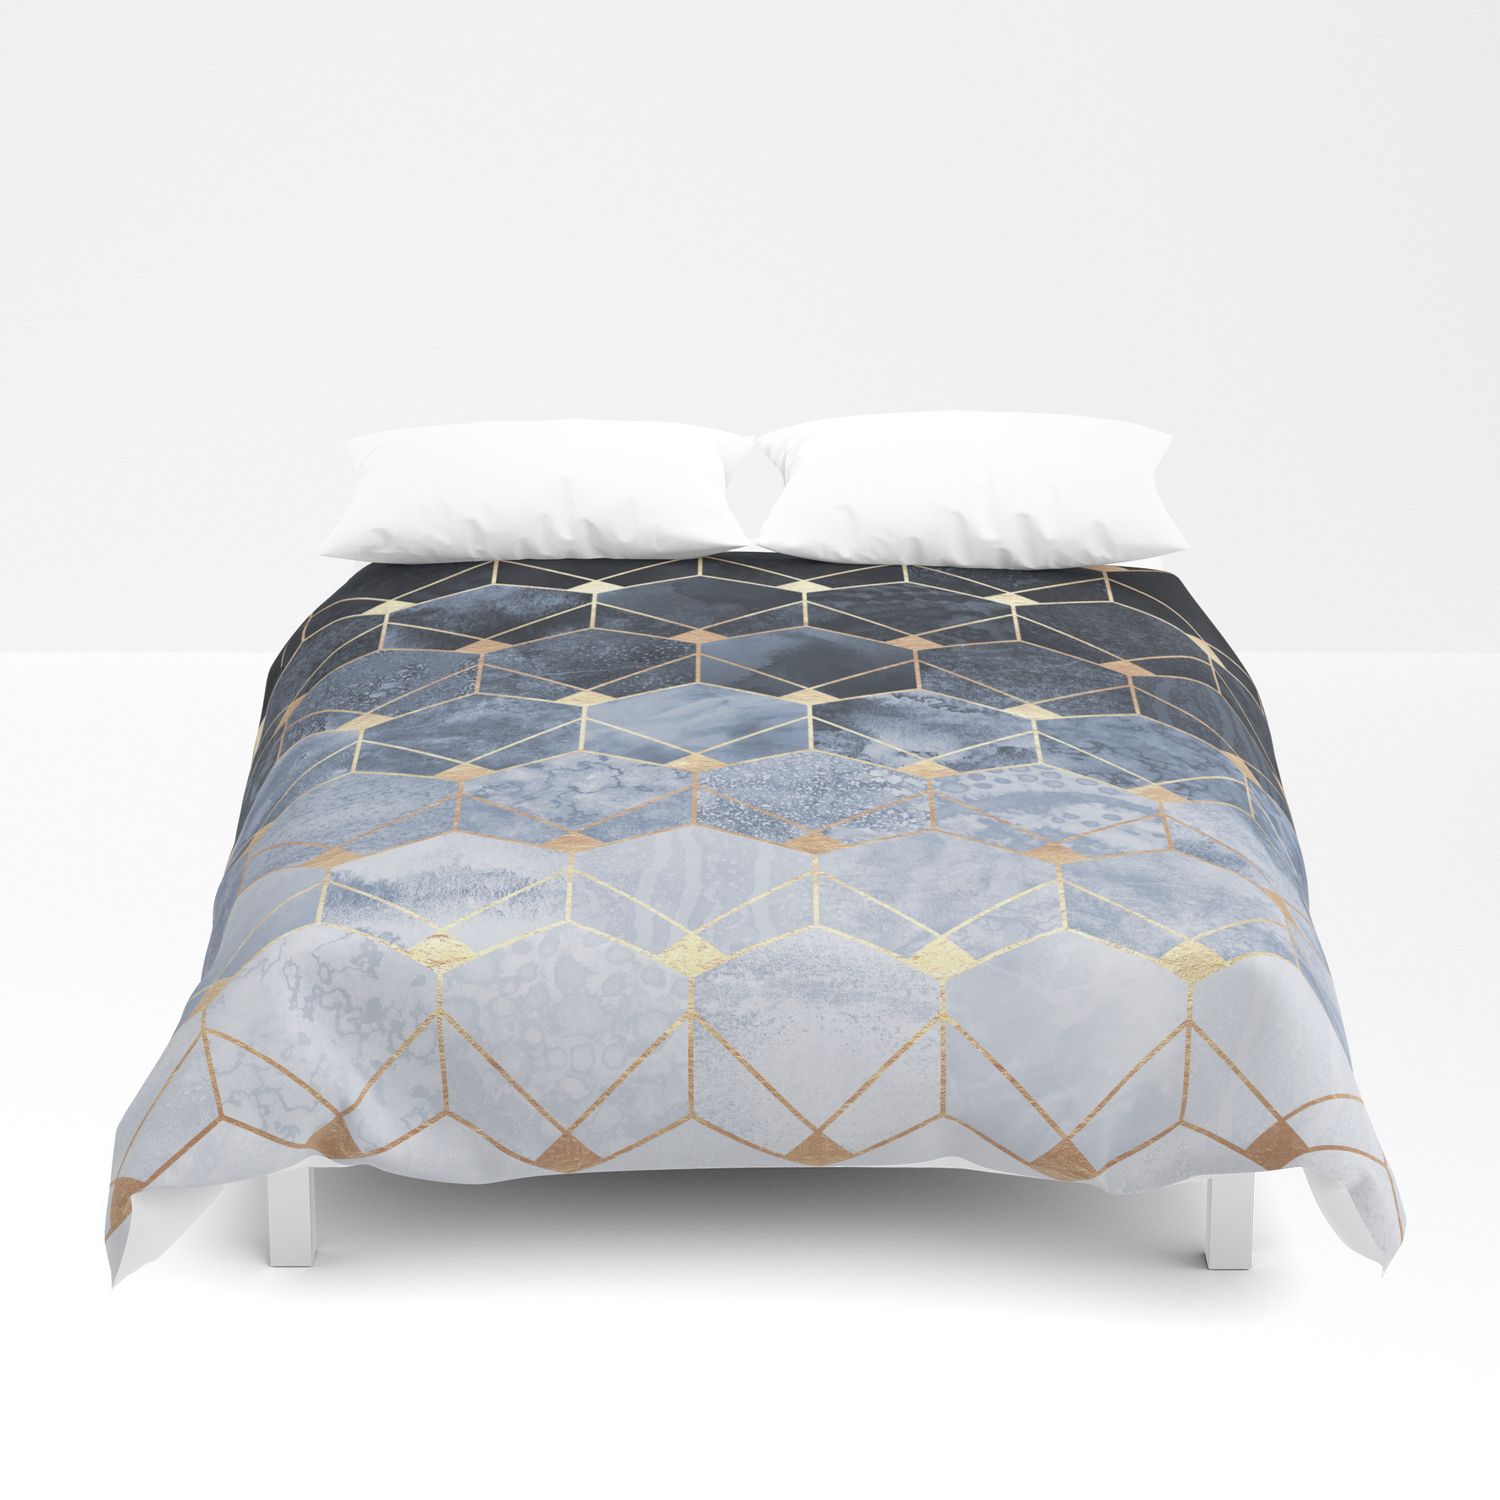 Blue Hexagons And Diamonds Duvet Cover With Regard To Blue Hexagons And Diamonds Credenzas (View 23 of 30)